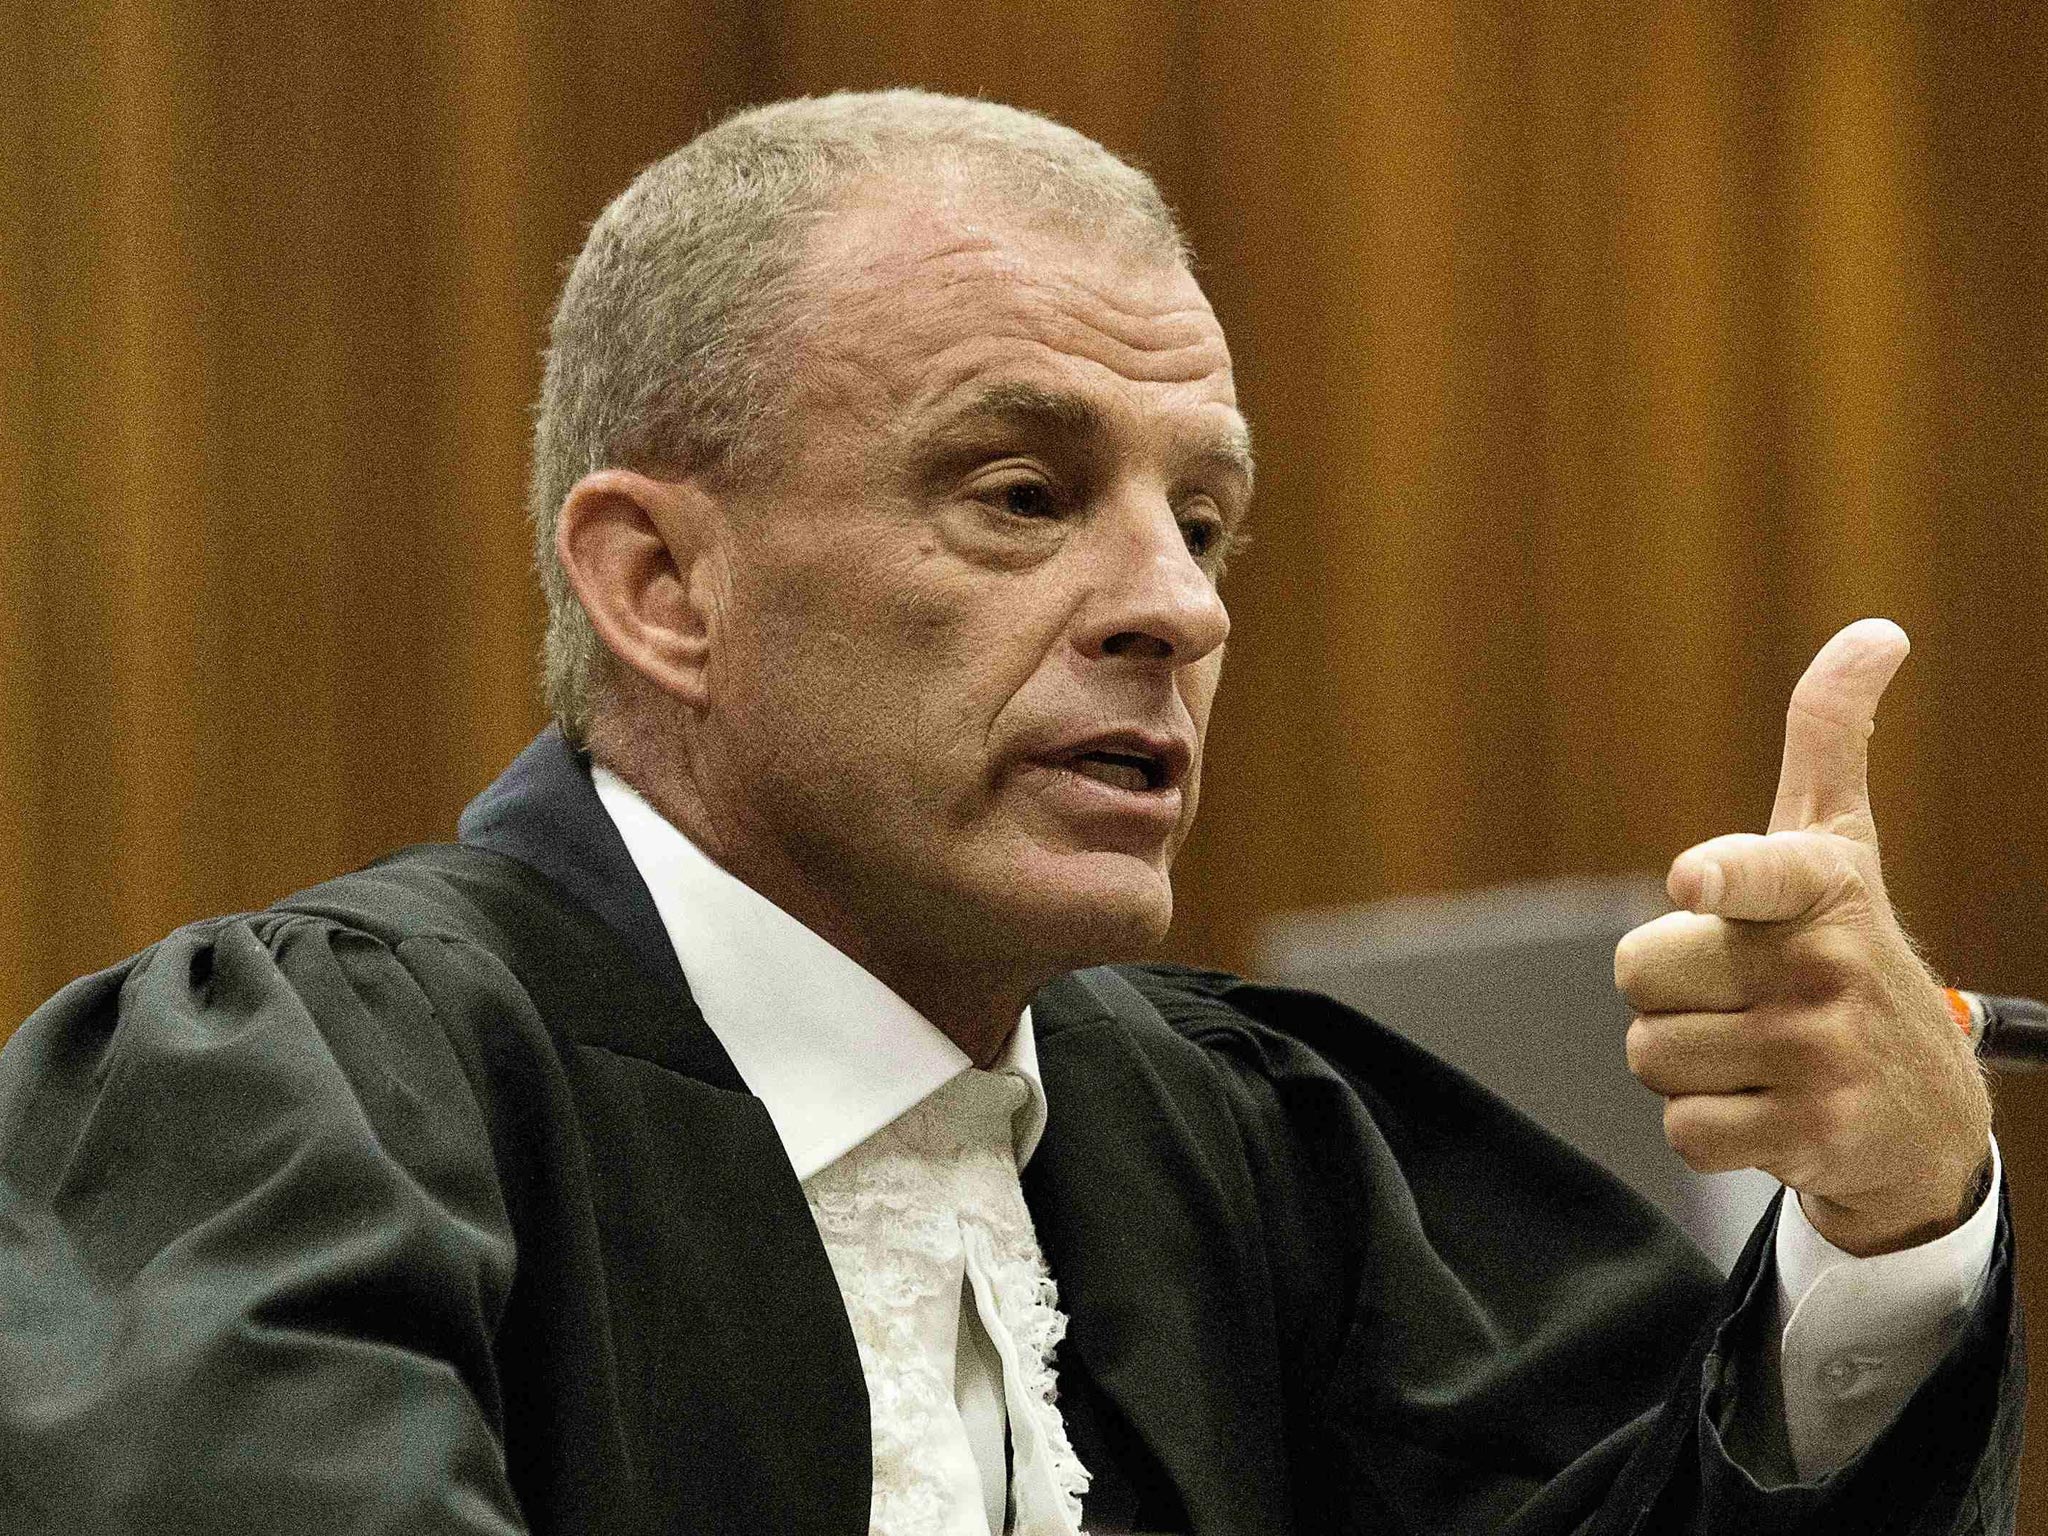 The state prosecutor Gerrie Nel cross examines the athlete Oscar
Pistorius at the High Court in Pretoria yesterday